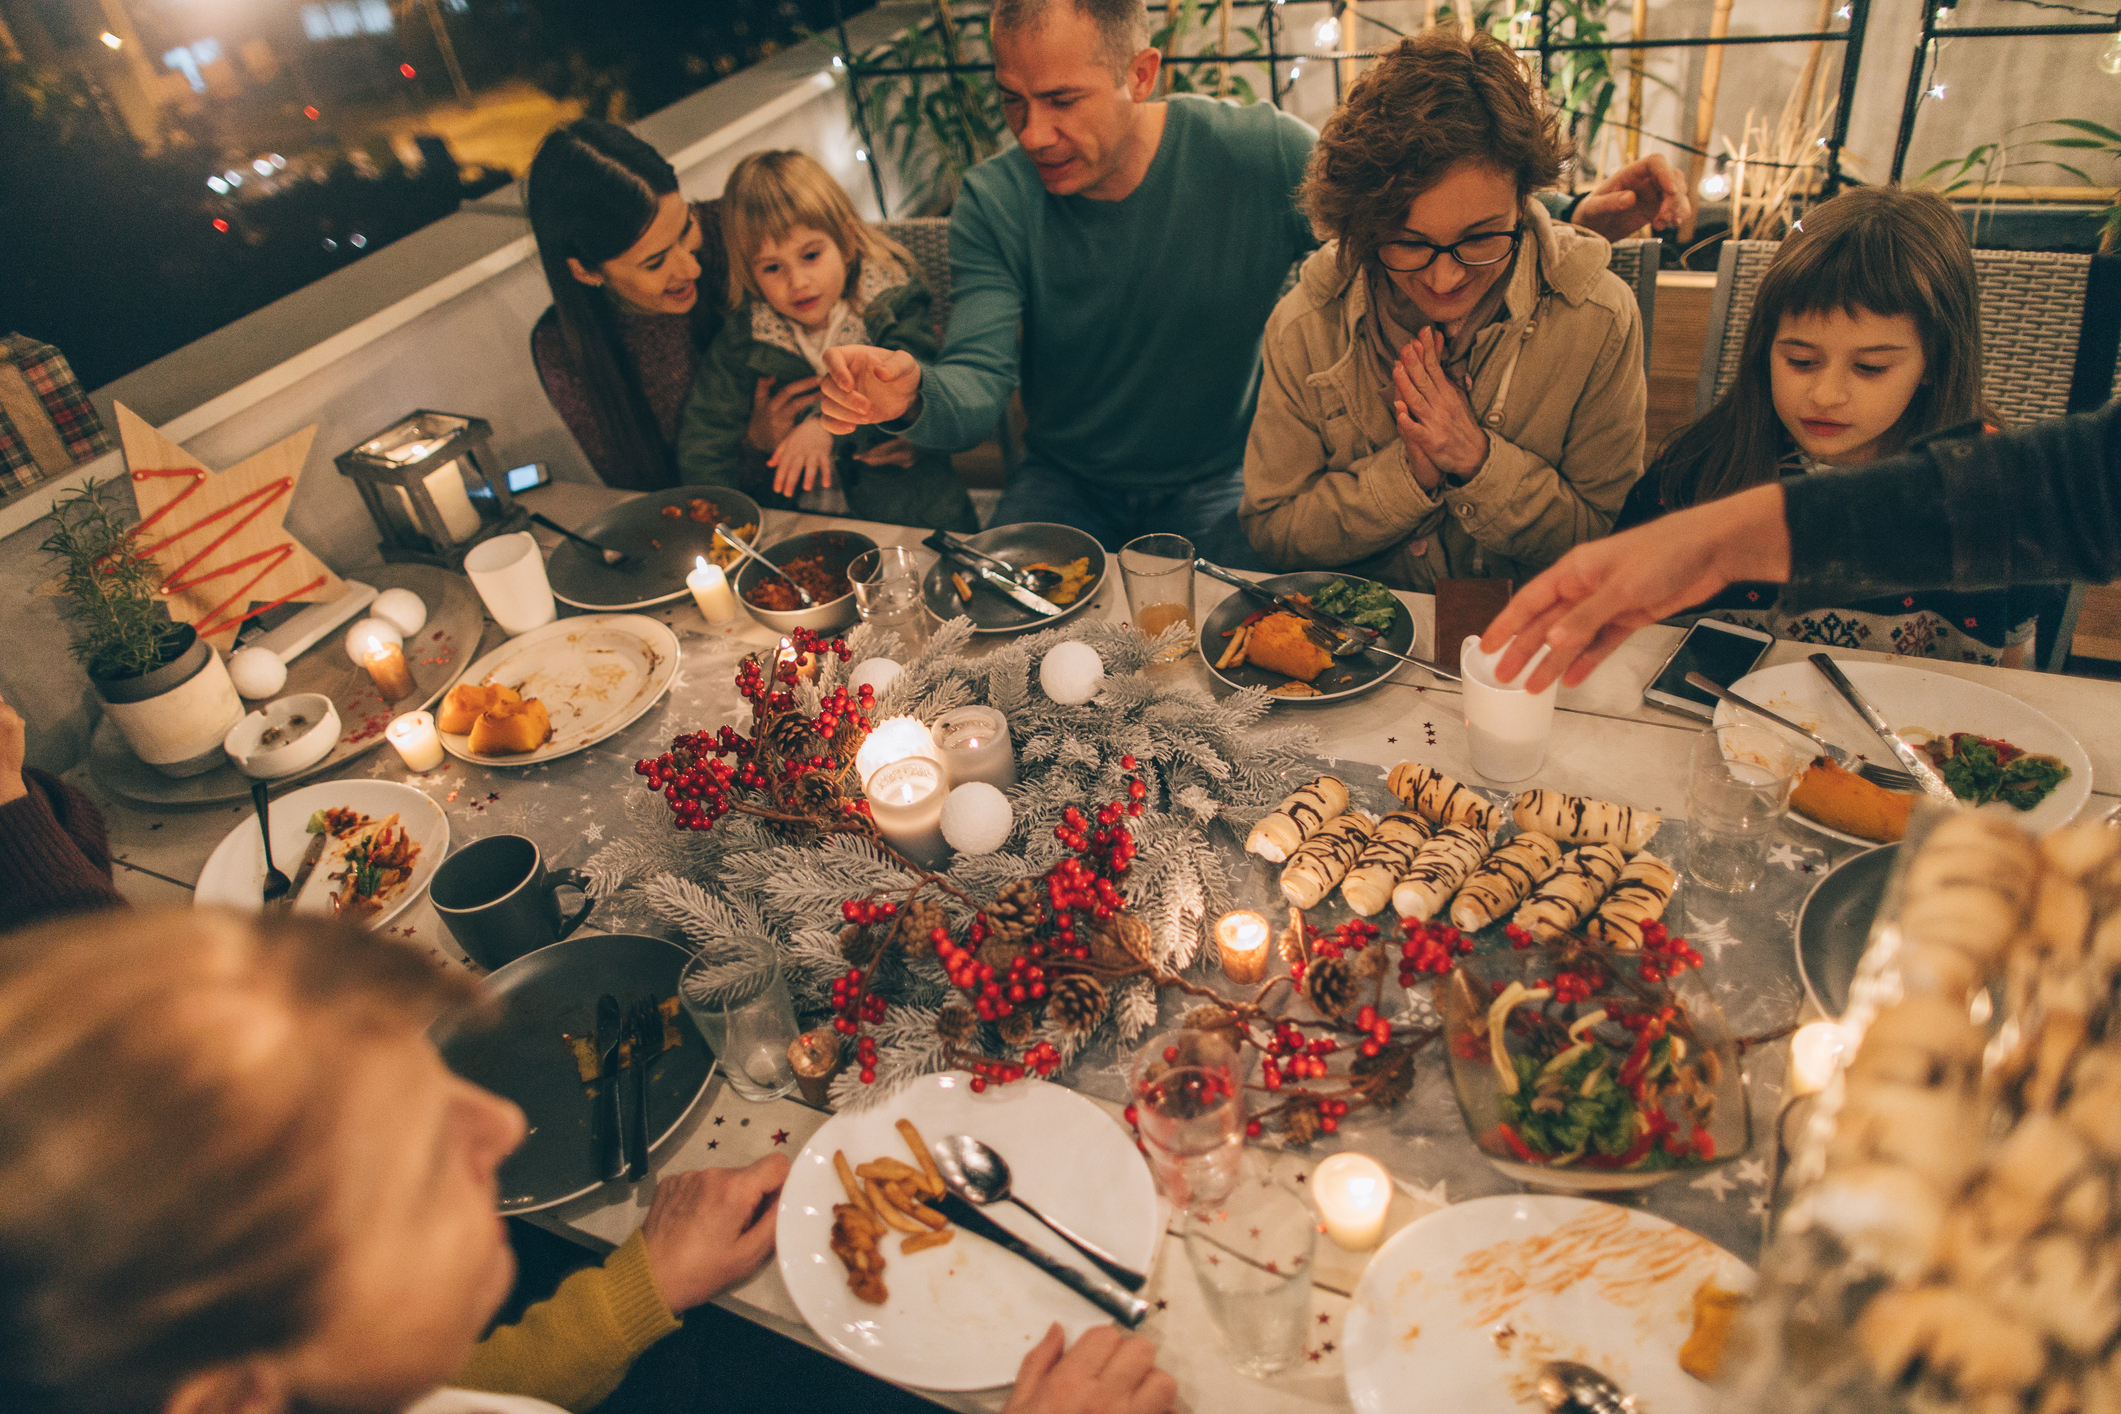 A family having a holiday dinner | Source: Getty Images